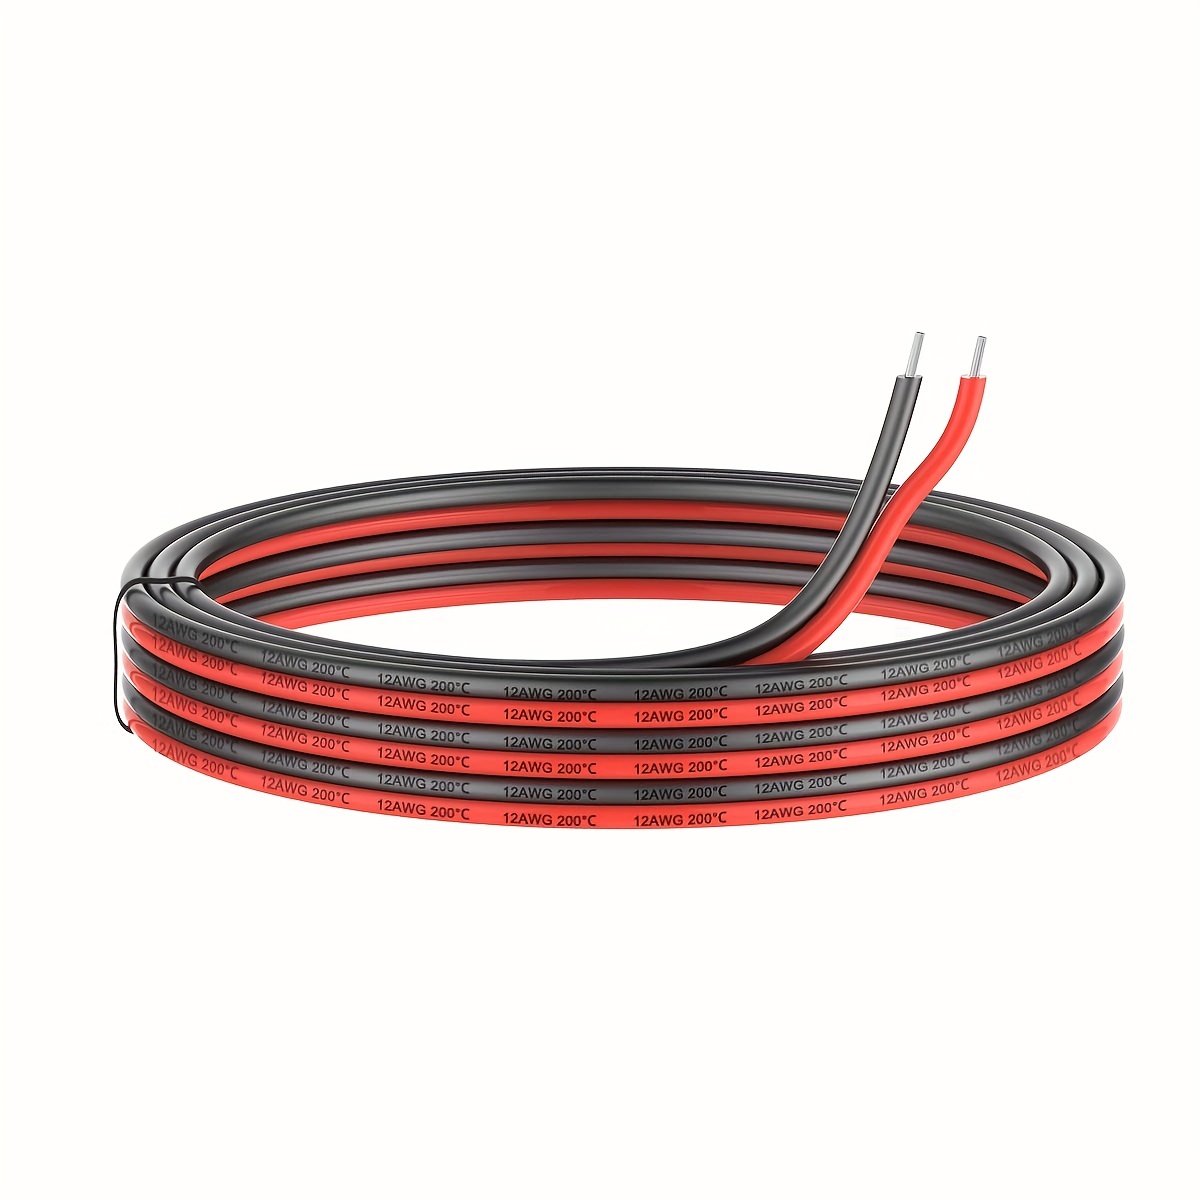 12 Gauge Silicone Wire 10 Feet - 12 AWG Silicone Wire - Flexible Silicone  Wire